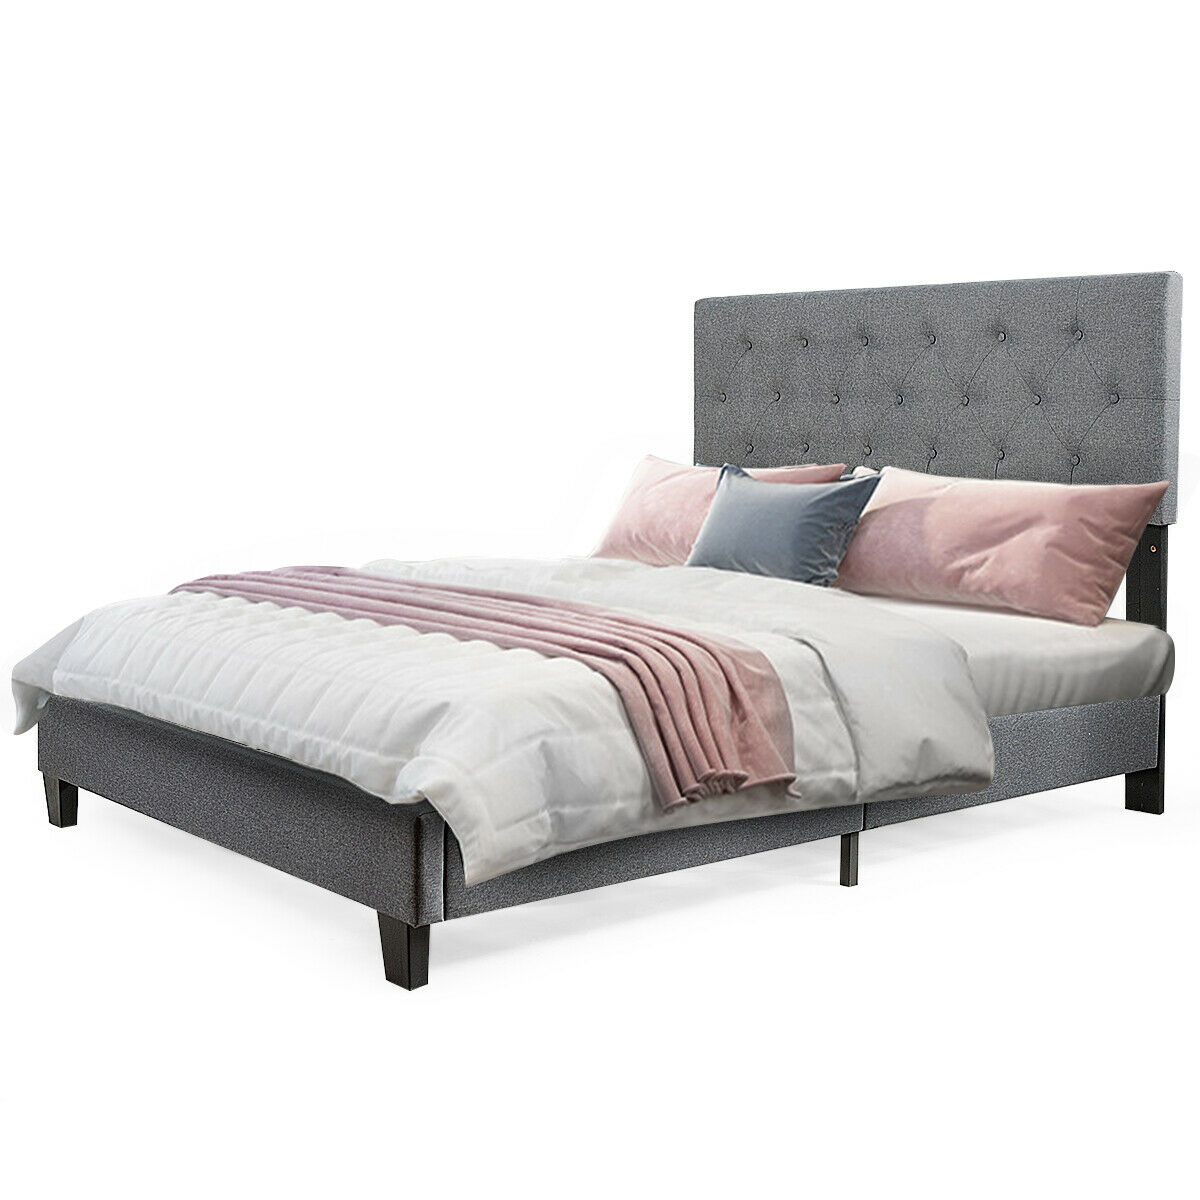 Costway Queen Size Upholstered Panel, Queen Bed With Cushion Headboard